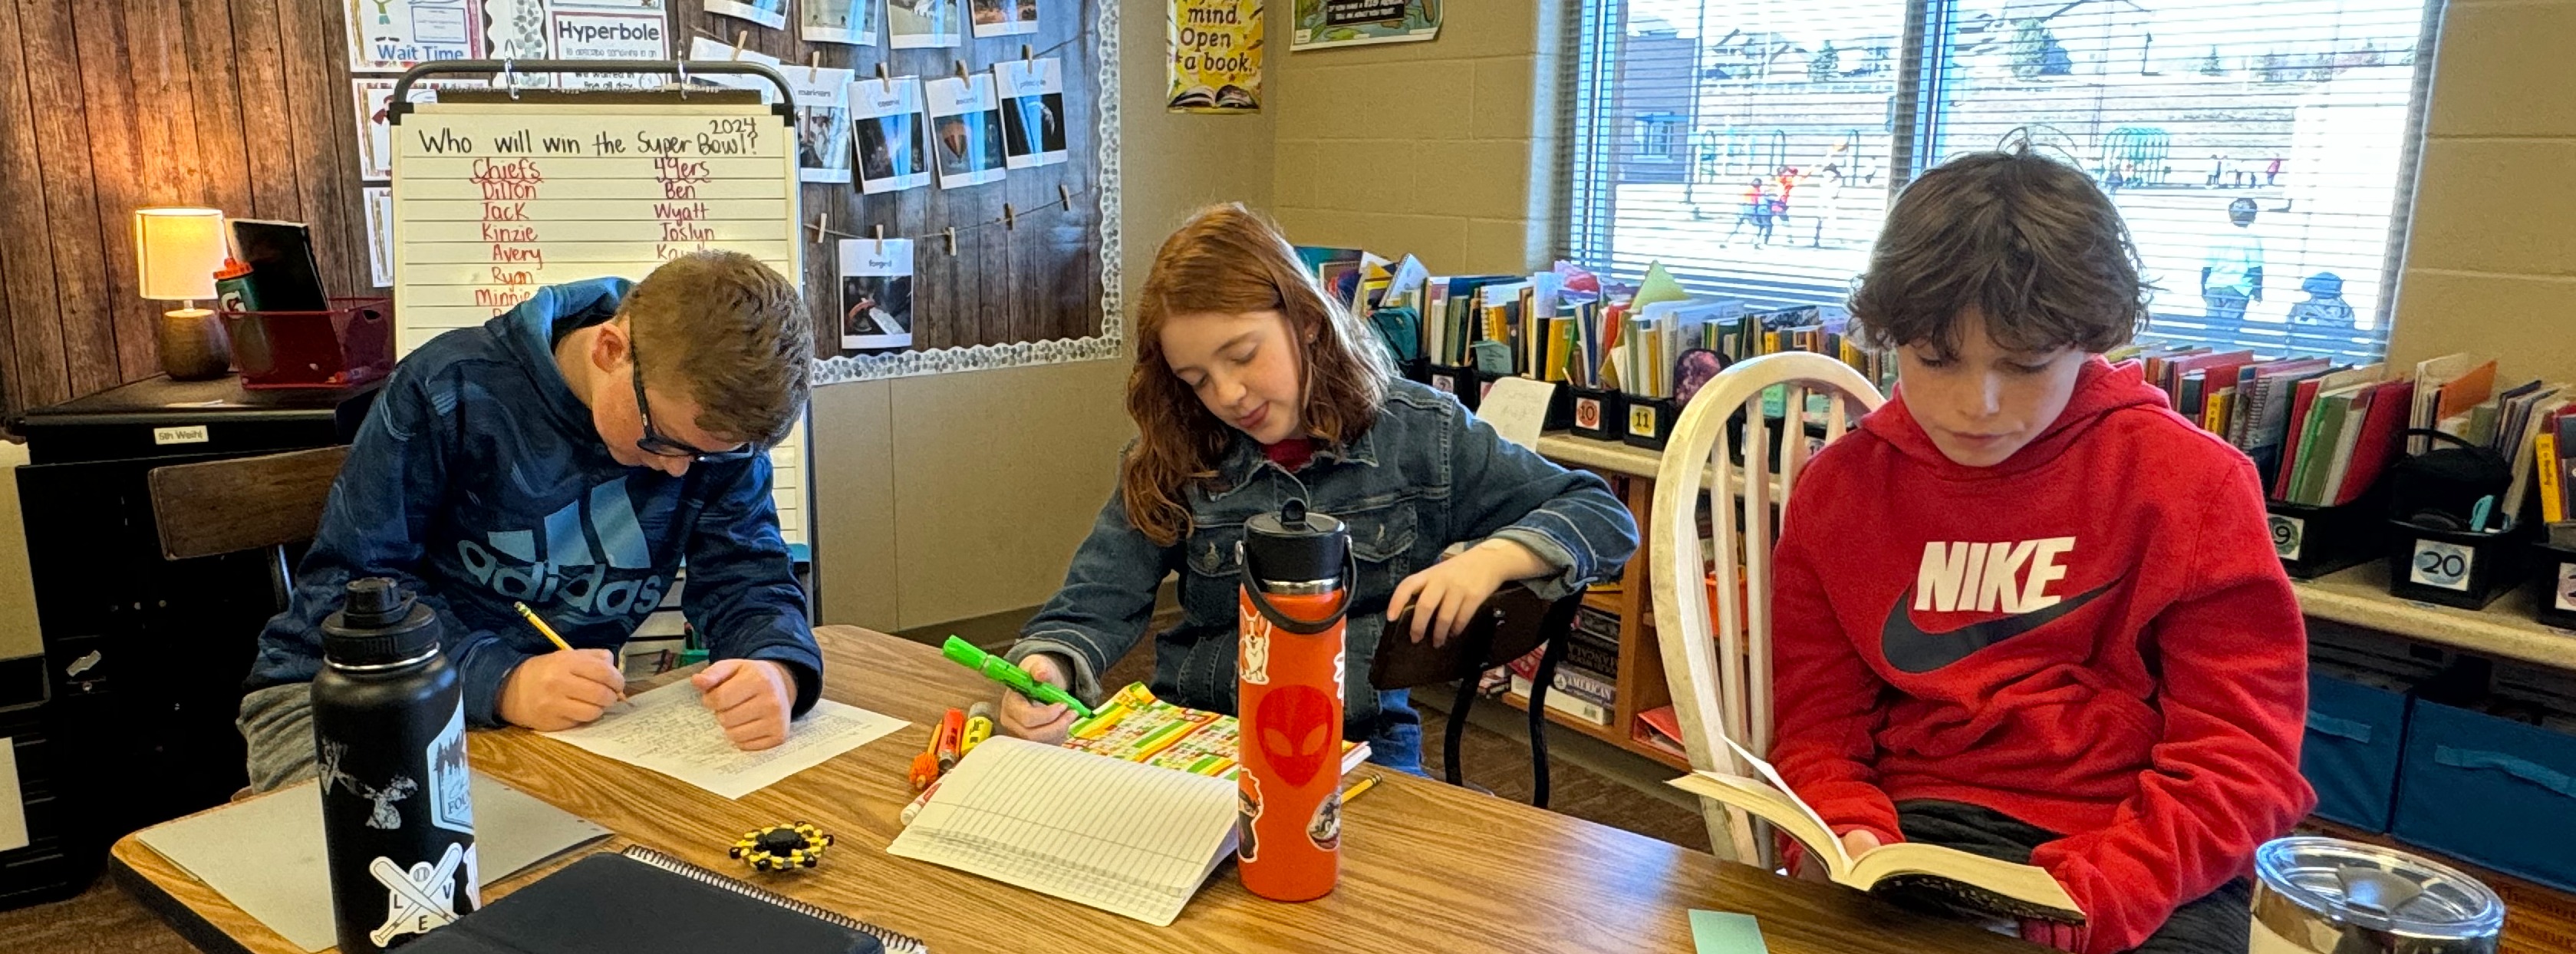 students reading at classroom desk